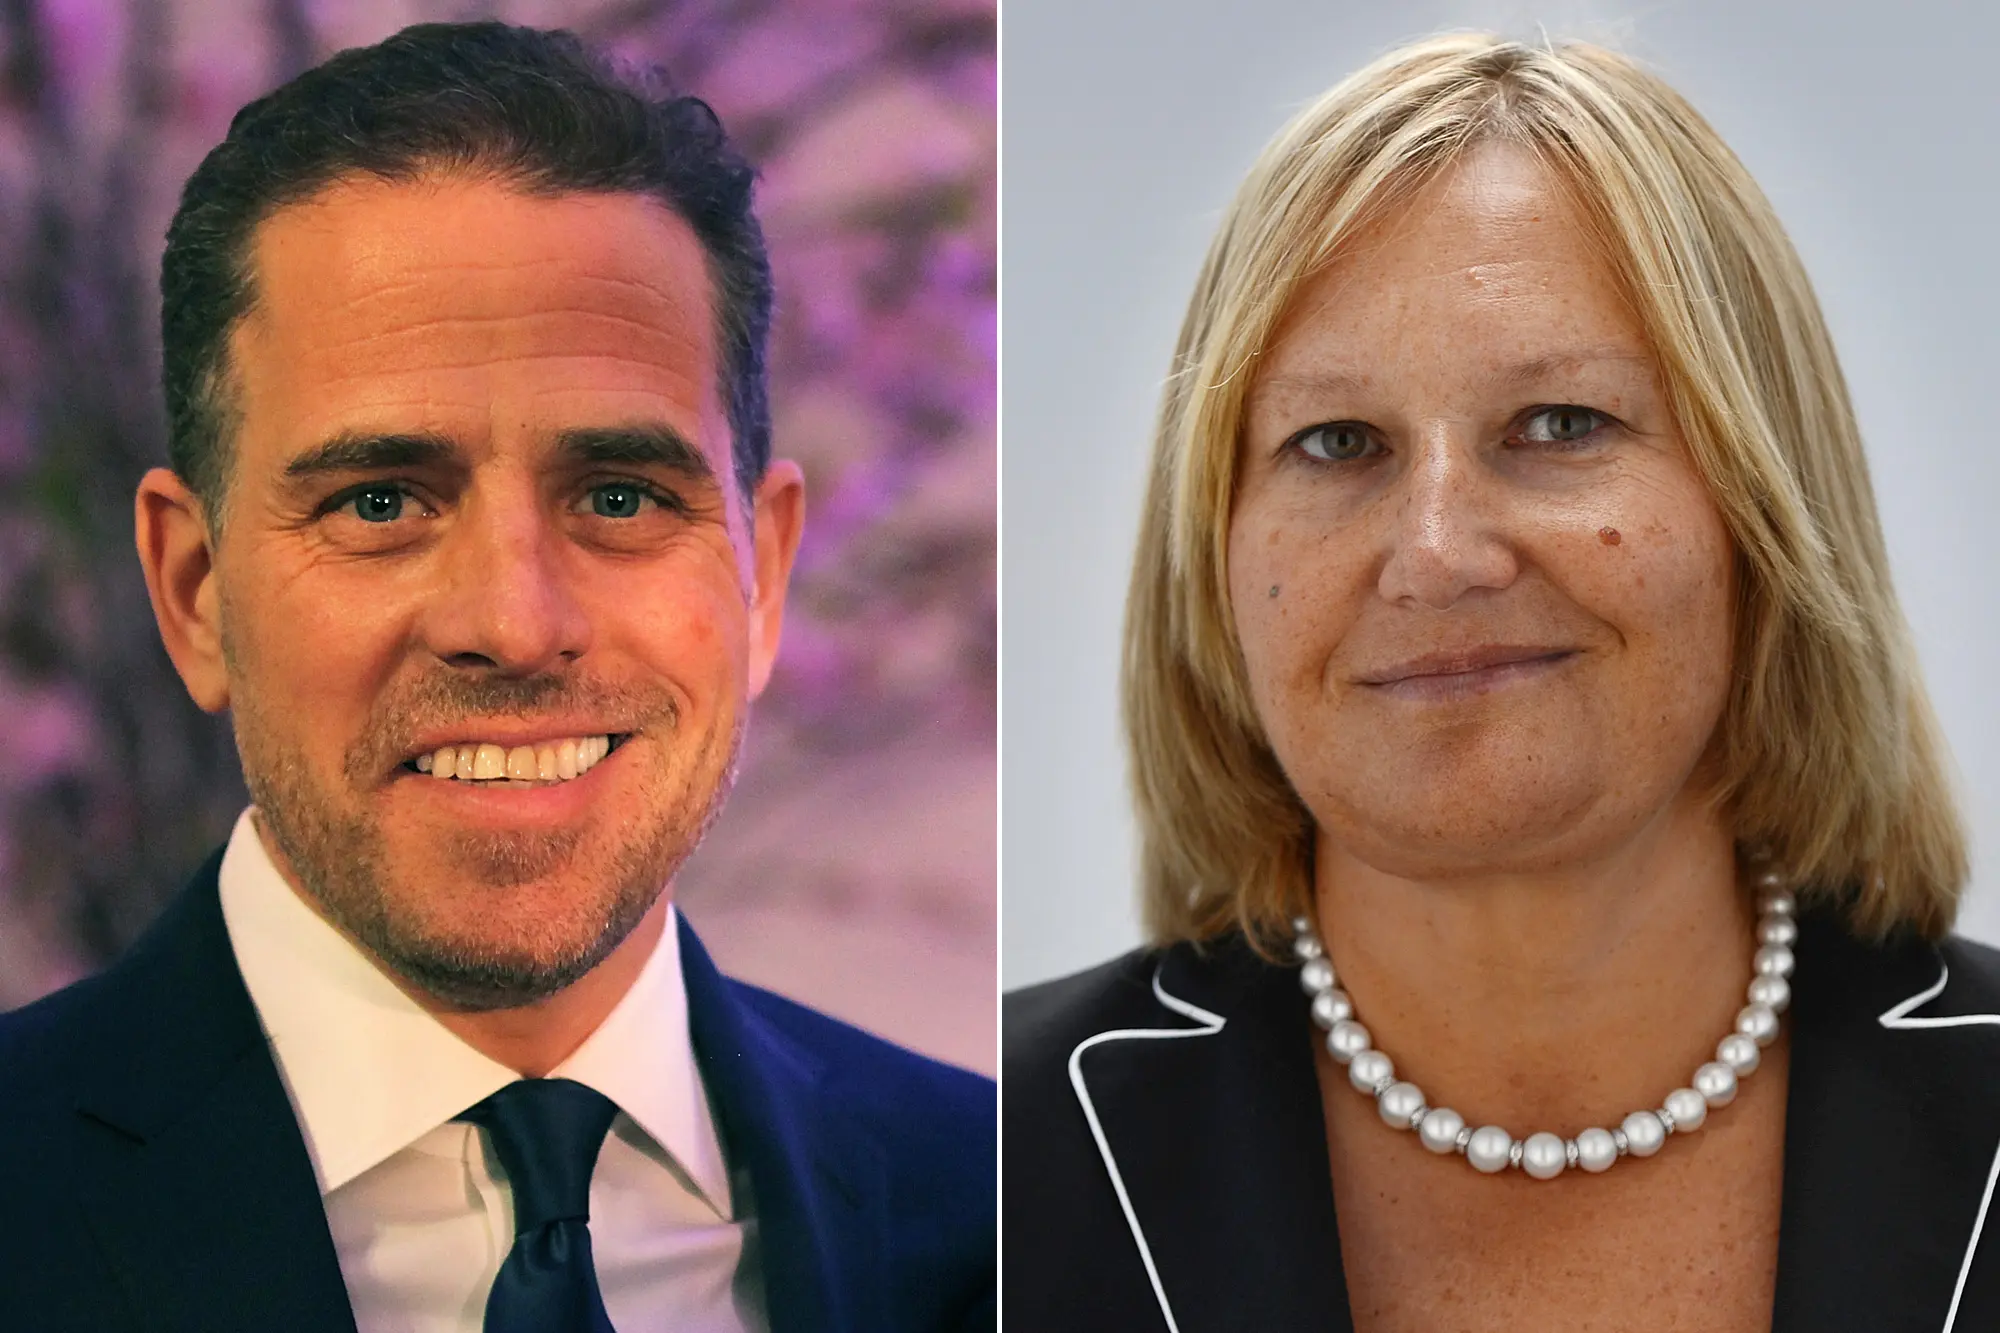 Hunter Biden Received $3.5 Million from Former Moscow Mayor's Wife